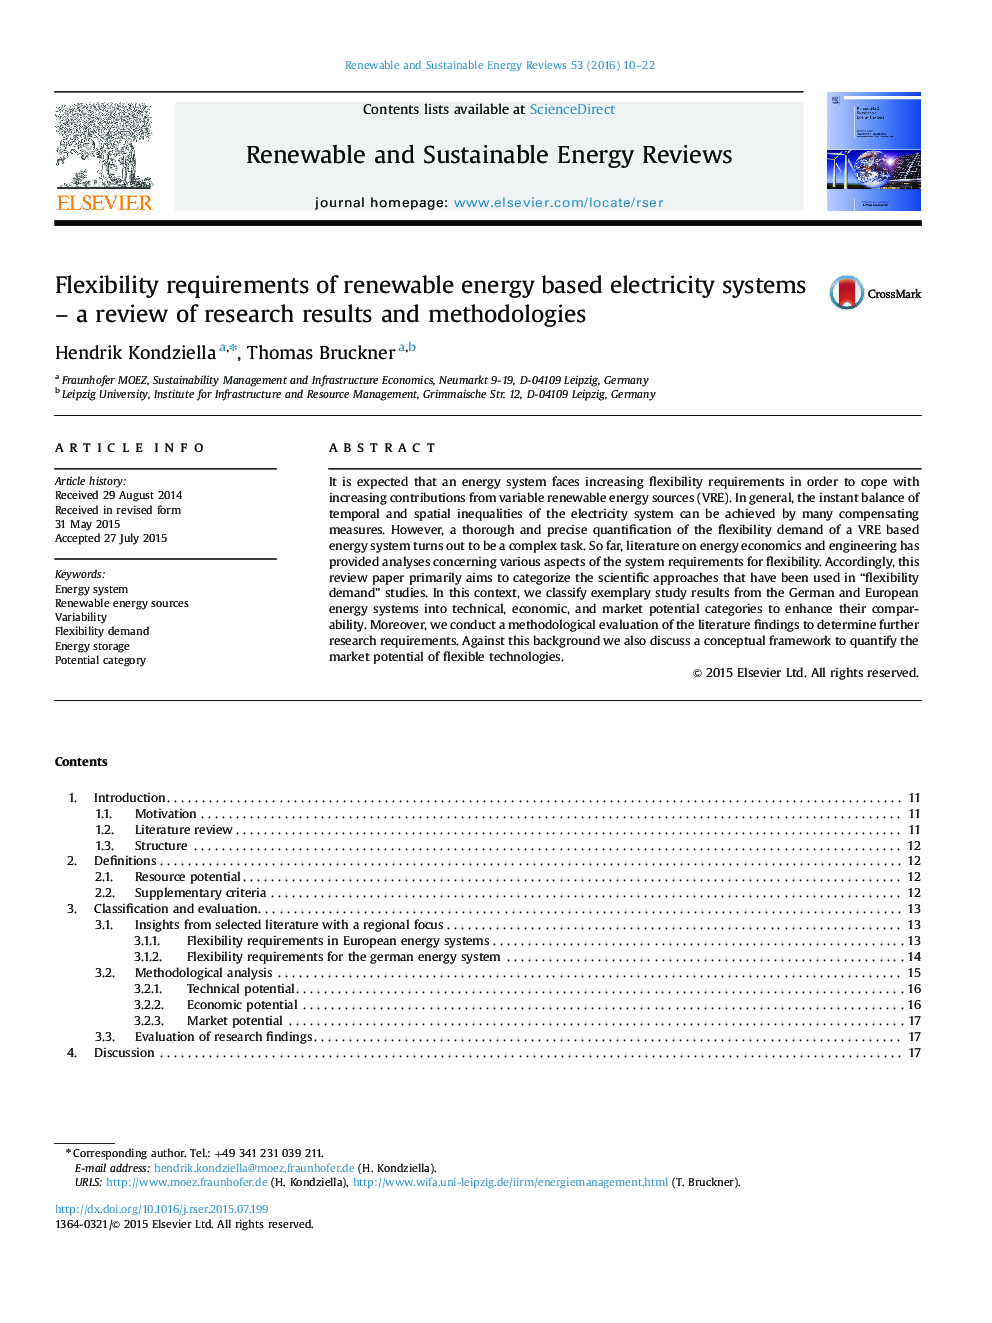 Flexibility requirements of renewable energy based electricity systems - a review of research results and methodologies